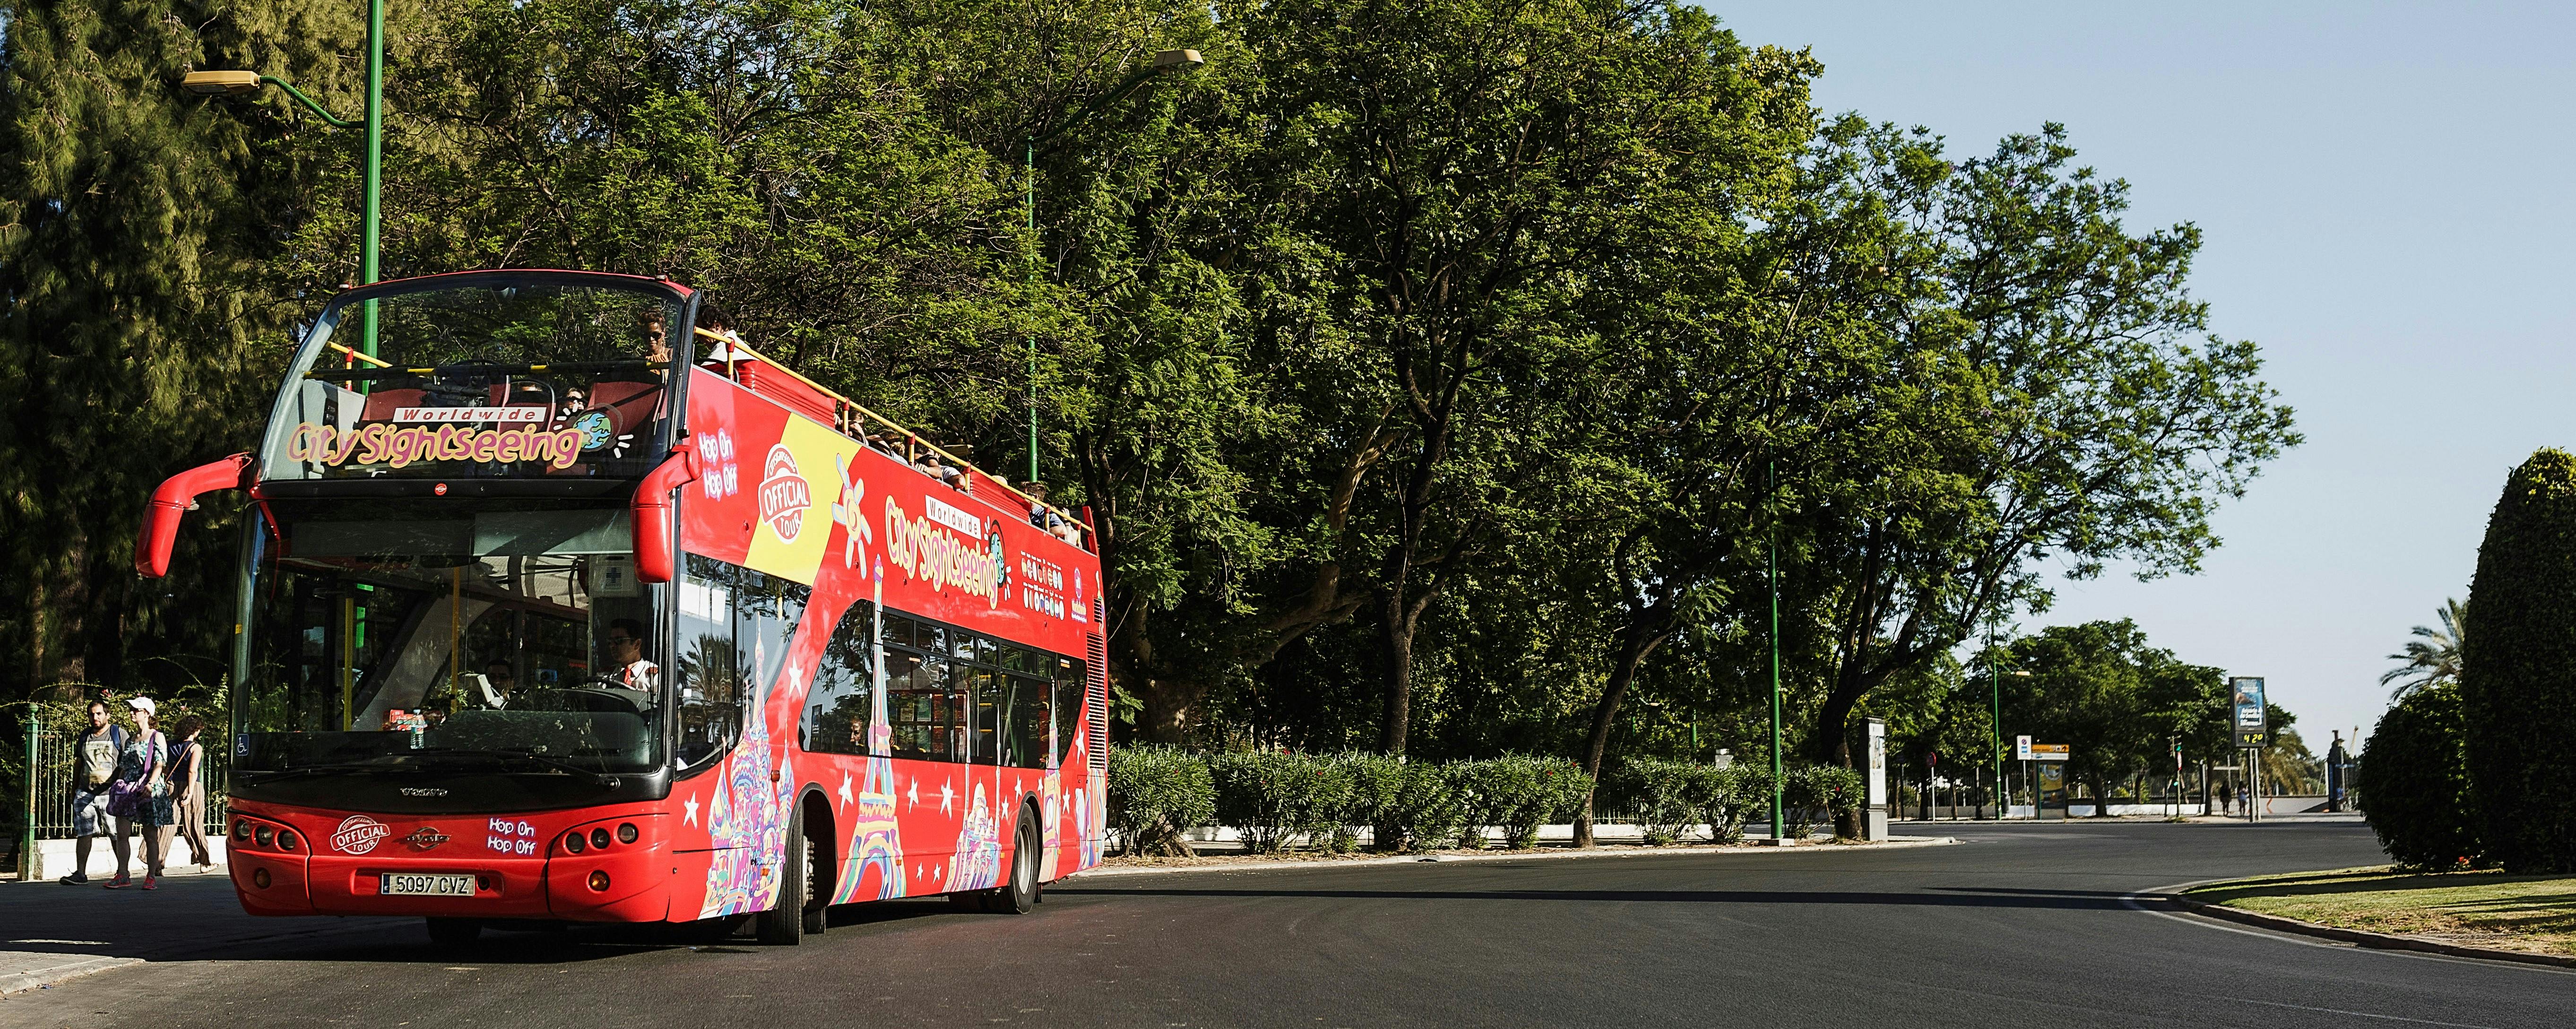 Tour di Benalmadena in autobus City Sightseeing hop-on hop-off